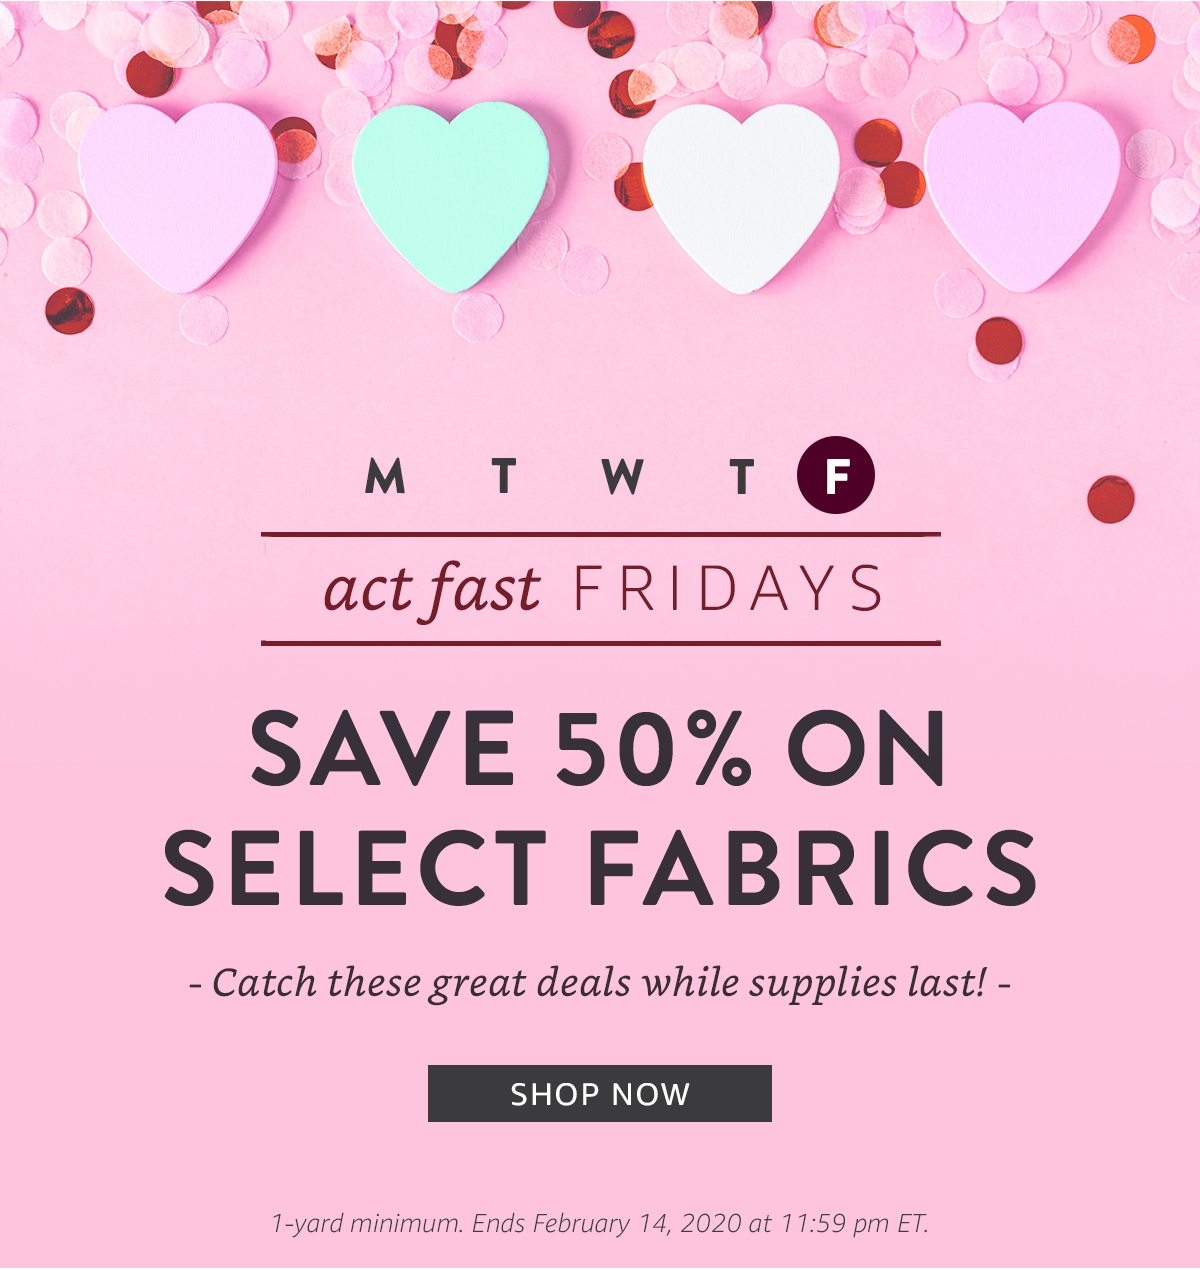 act fast FRIDAYS | SAVE 50% | SHOP NOW | 1-yard minimum. Ends February 14, 2020 at 11:59 pm ET.